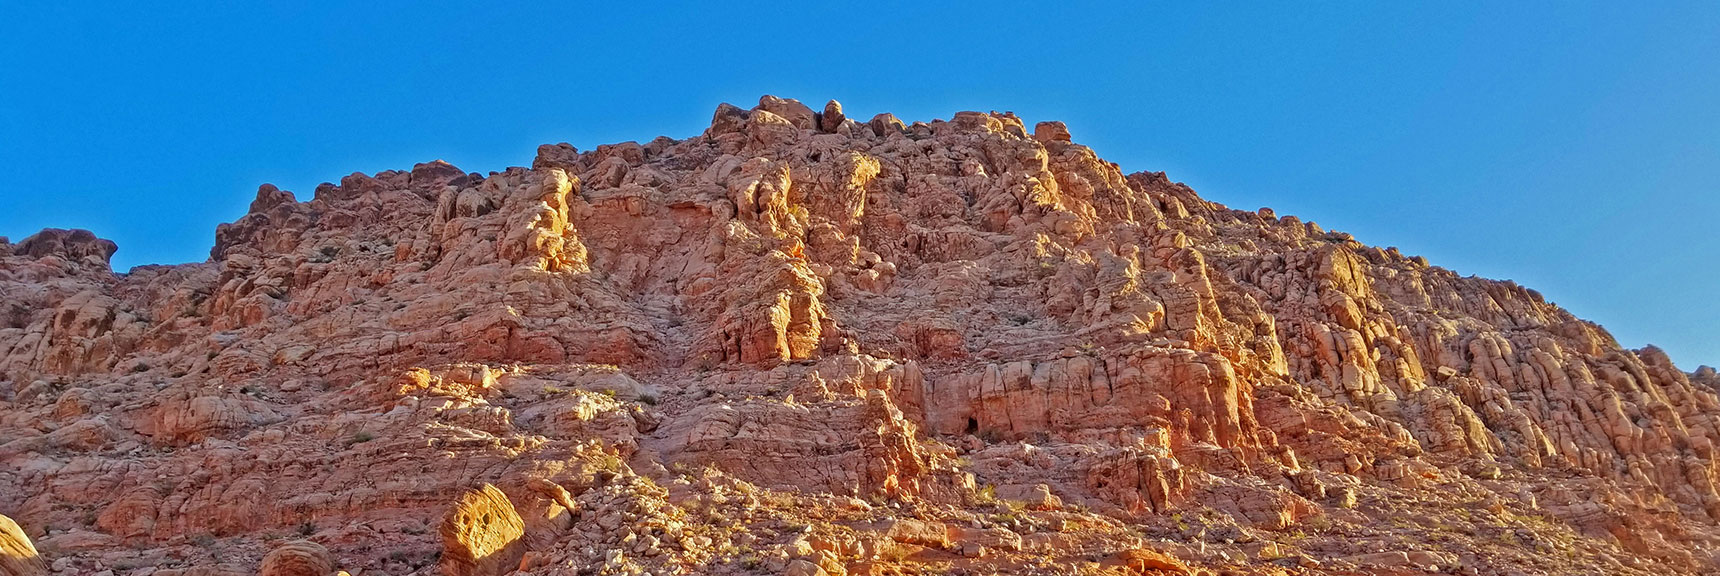 Imagine Being Here When Those Huge Boulders Fell to the Base of Kraft Mountain! | Kraft Mountain, Gateway Canyon Loop, Calico Basin, Nevada